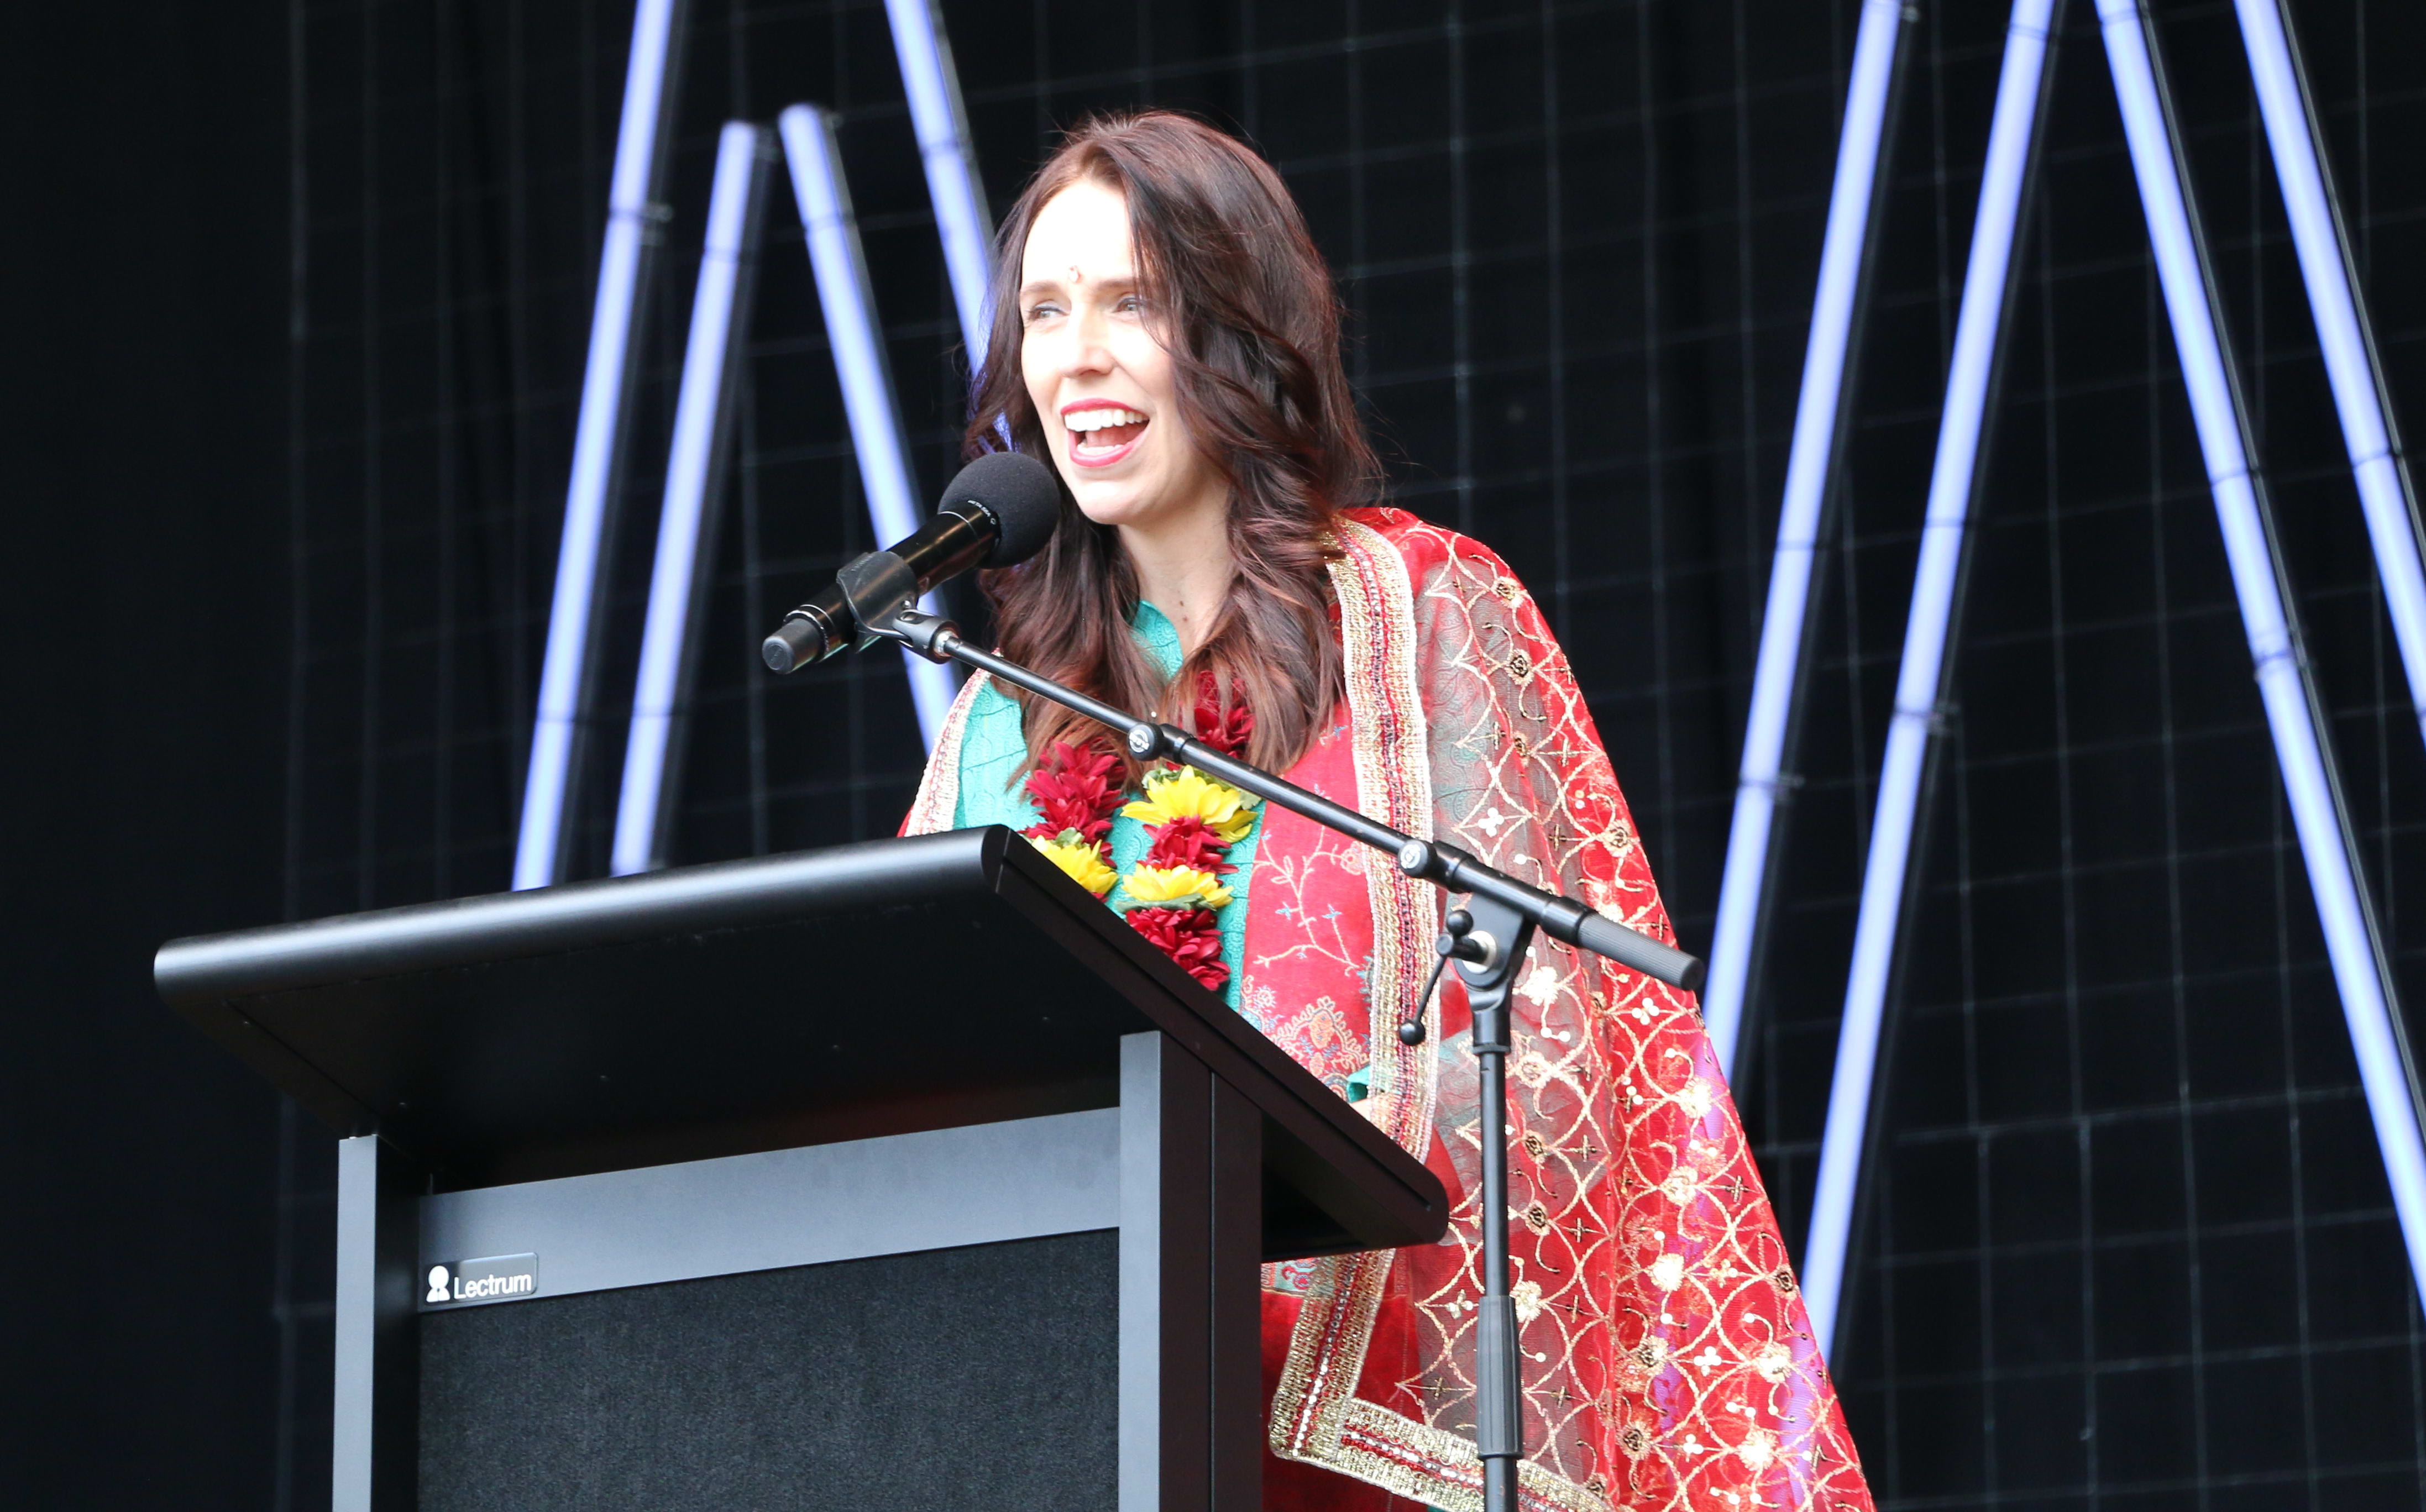 Prime Minister Jacinda Ardern officially opened the Diwali festival at the Aotea Centre.